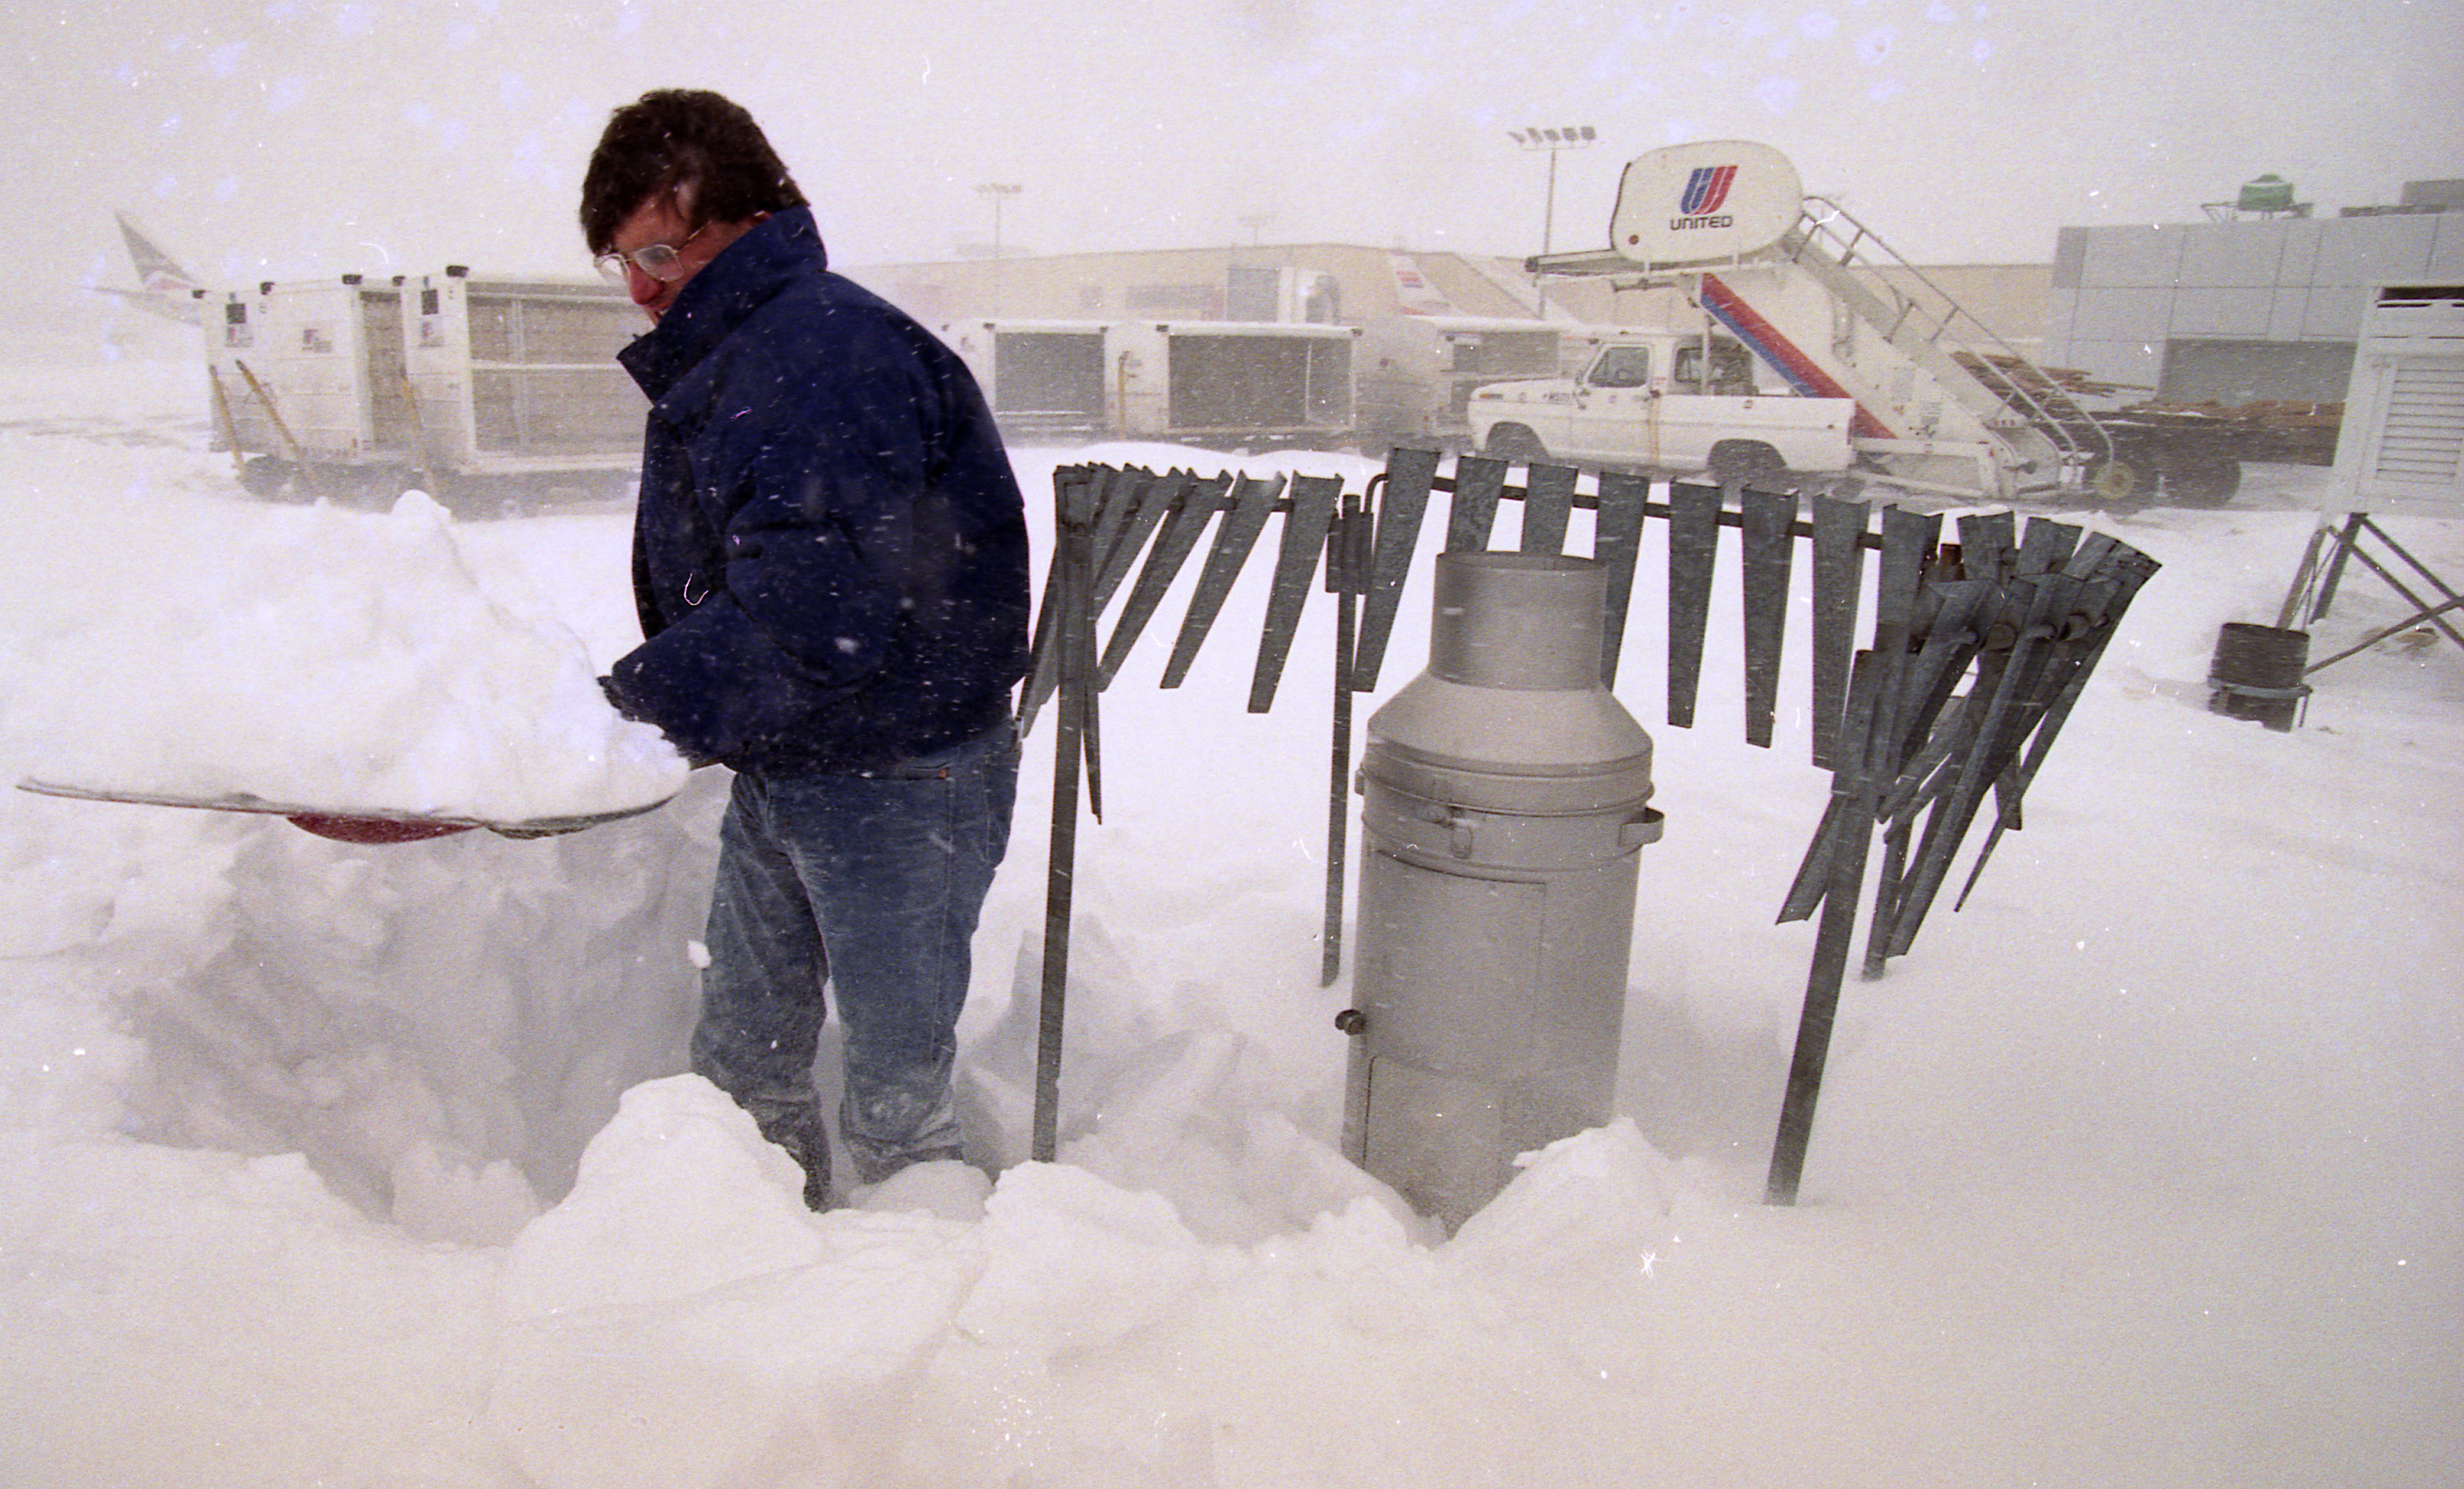 Jon Elardo, a meteorologist with the National Weather Service at Hancock Airport, shoveling out snow during 2 day storm so he can take readings.